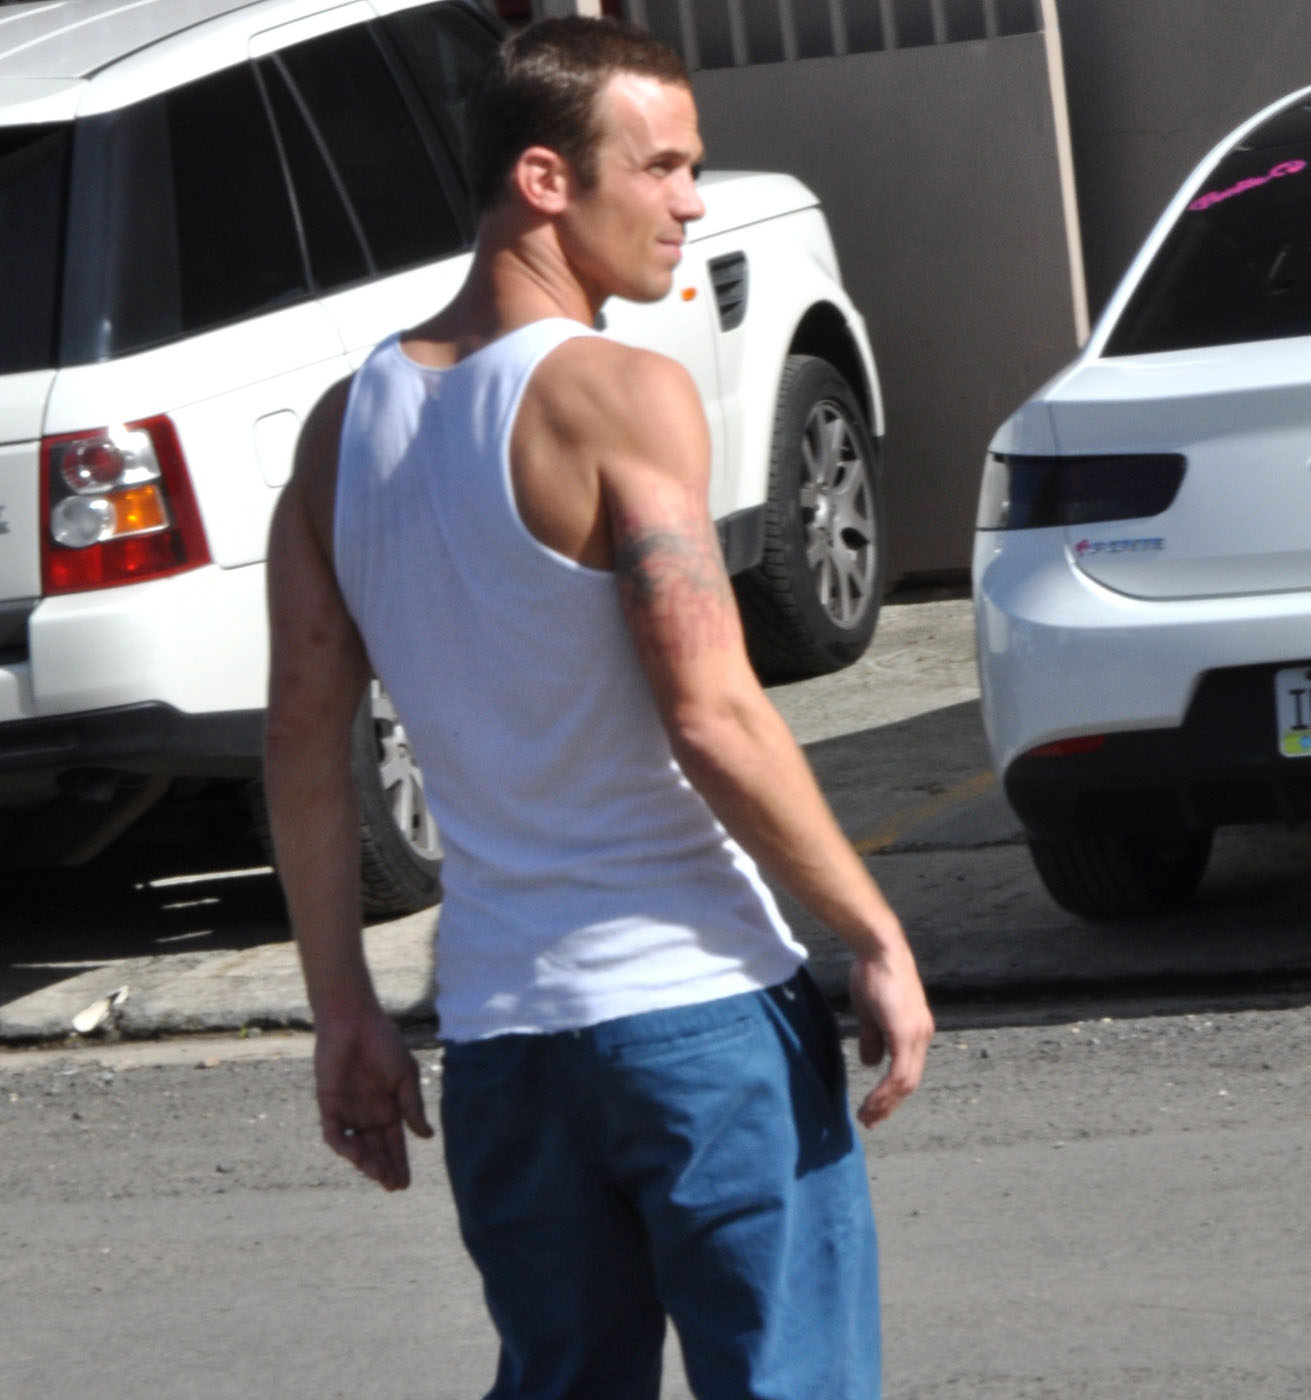 Easy A's Cam Gigandet shows off his physique in a terrible looking whi...